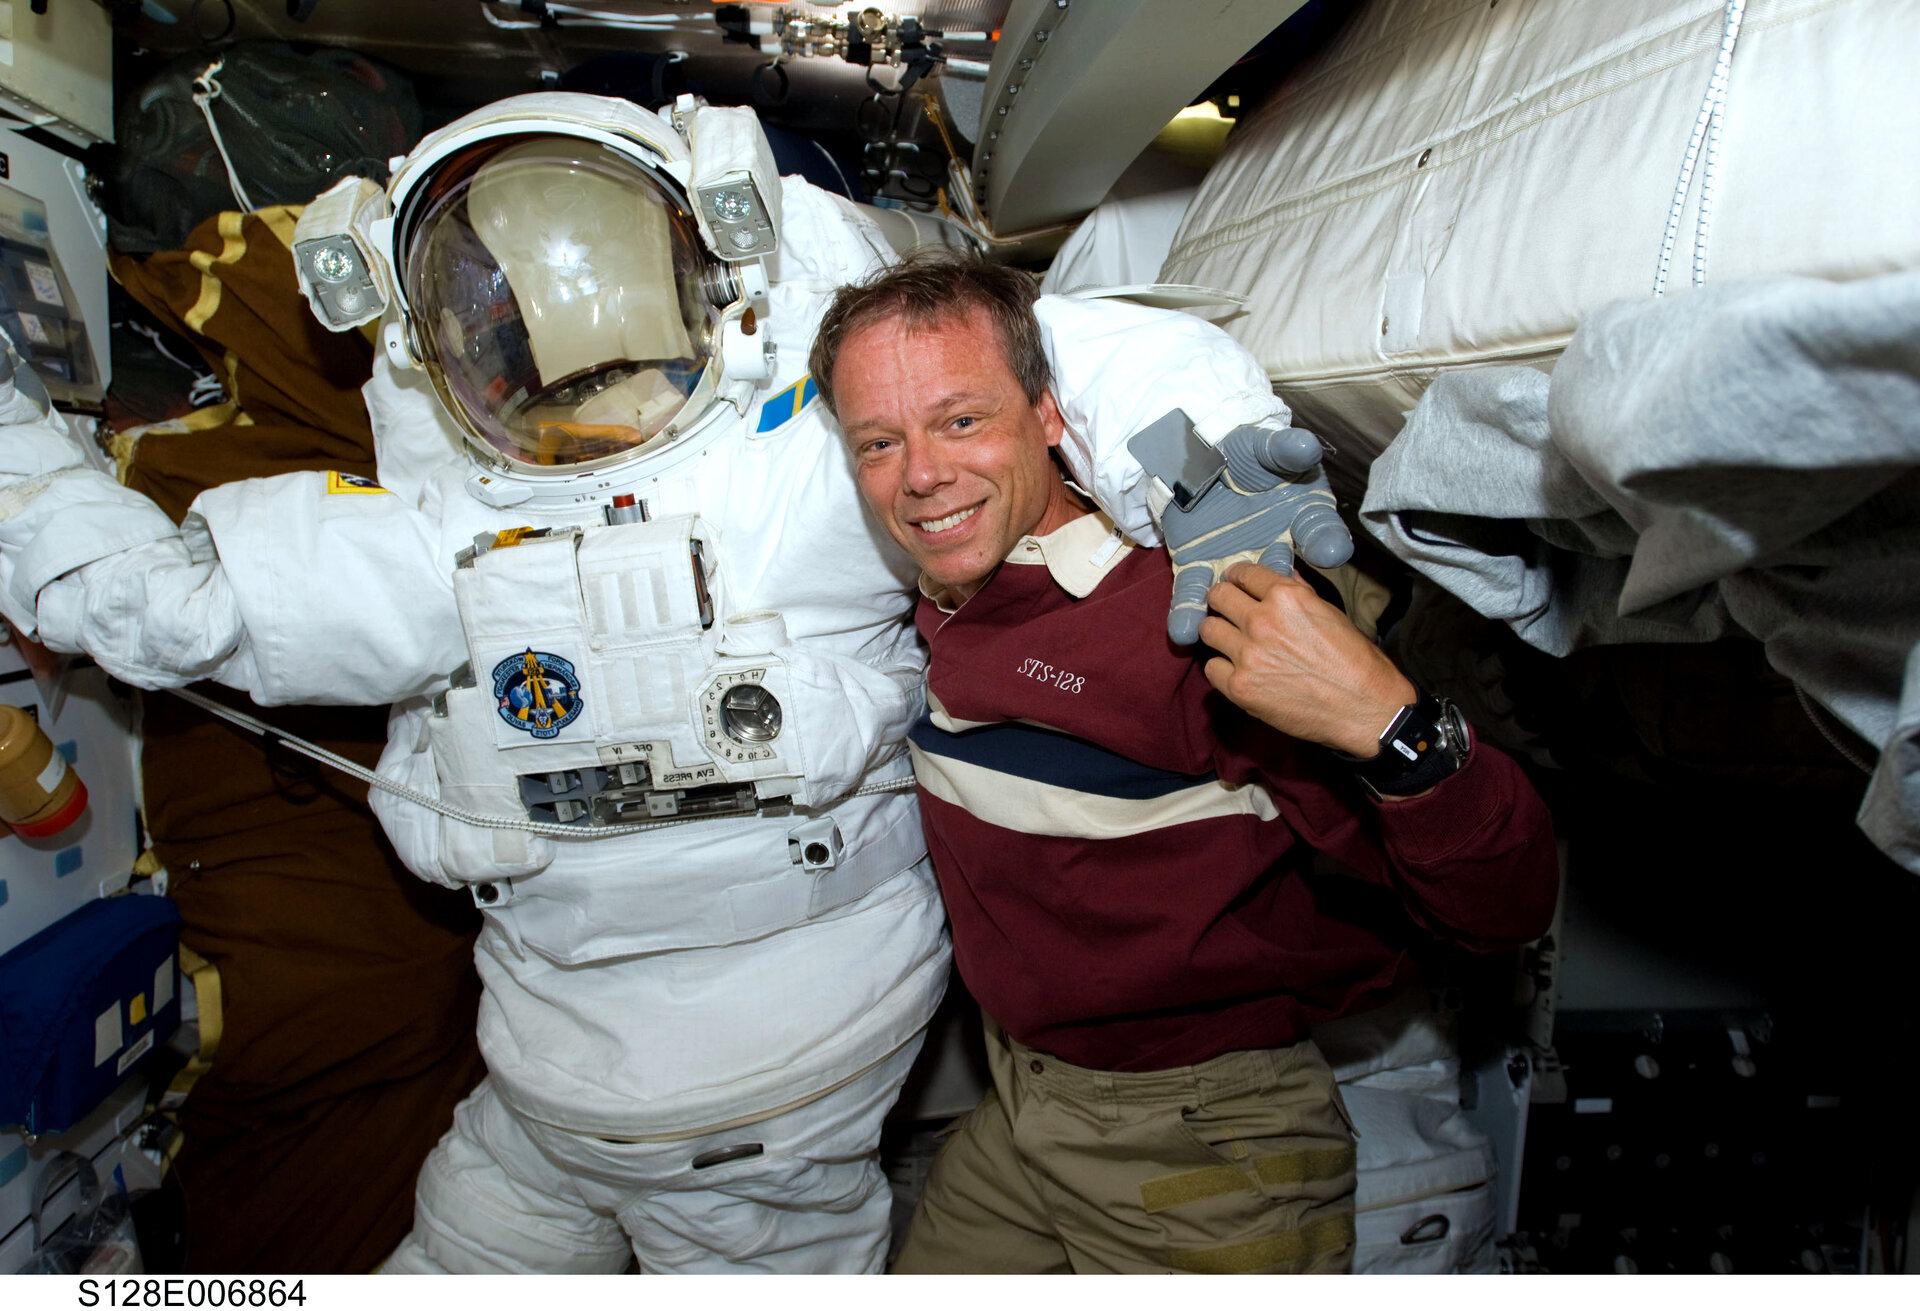 ESA astronaut Christer Fuglesang with EVA spacesuit on Shuttle middeck